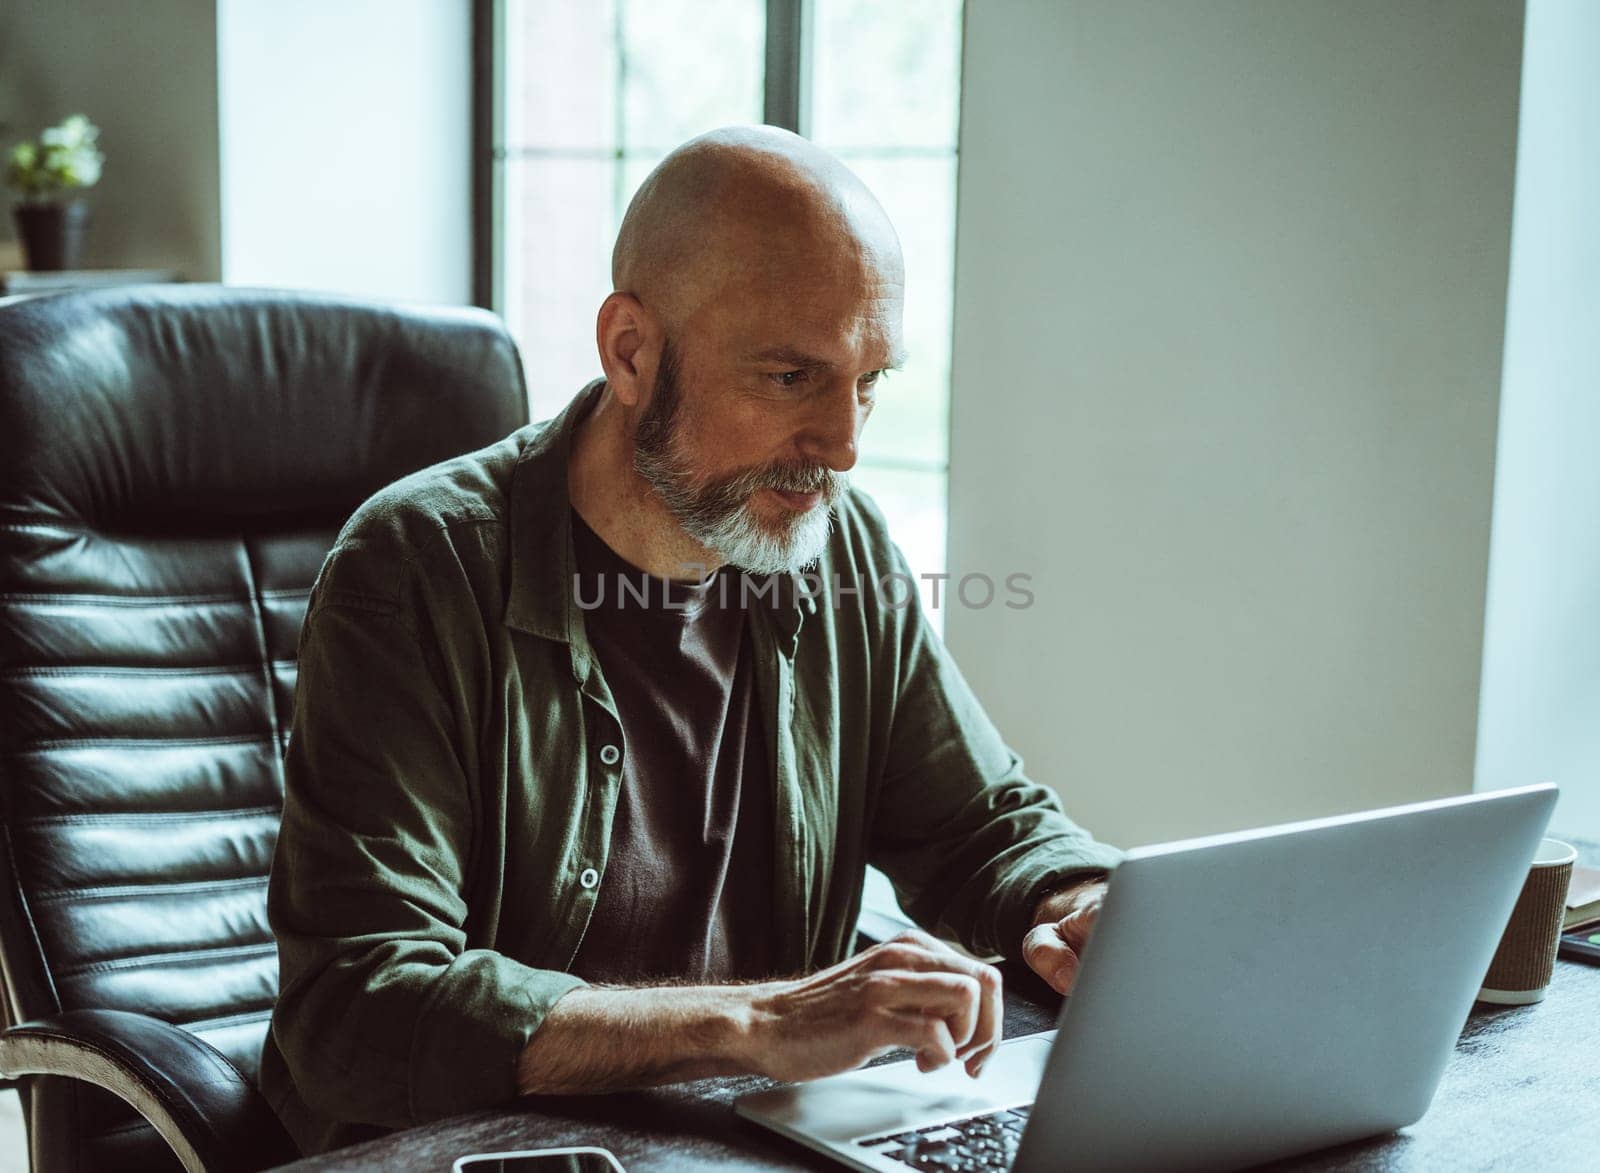 Man deeply concentrated on work as freelancer. With unwavering focus and passion, he immerses himself in his tasks within office space, situated across window. High quality photo